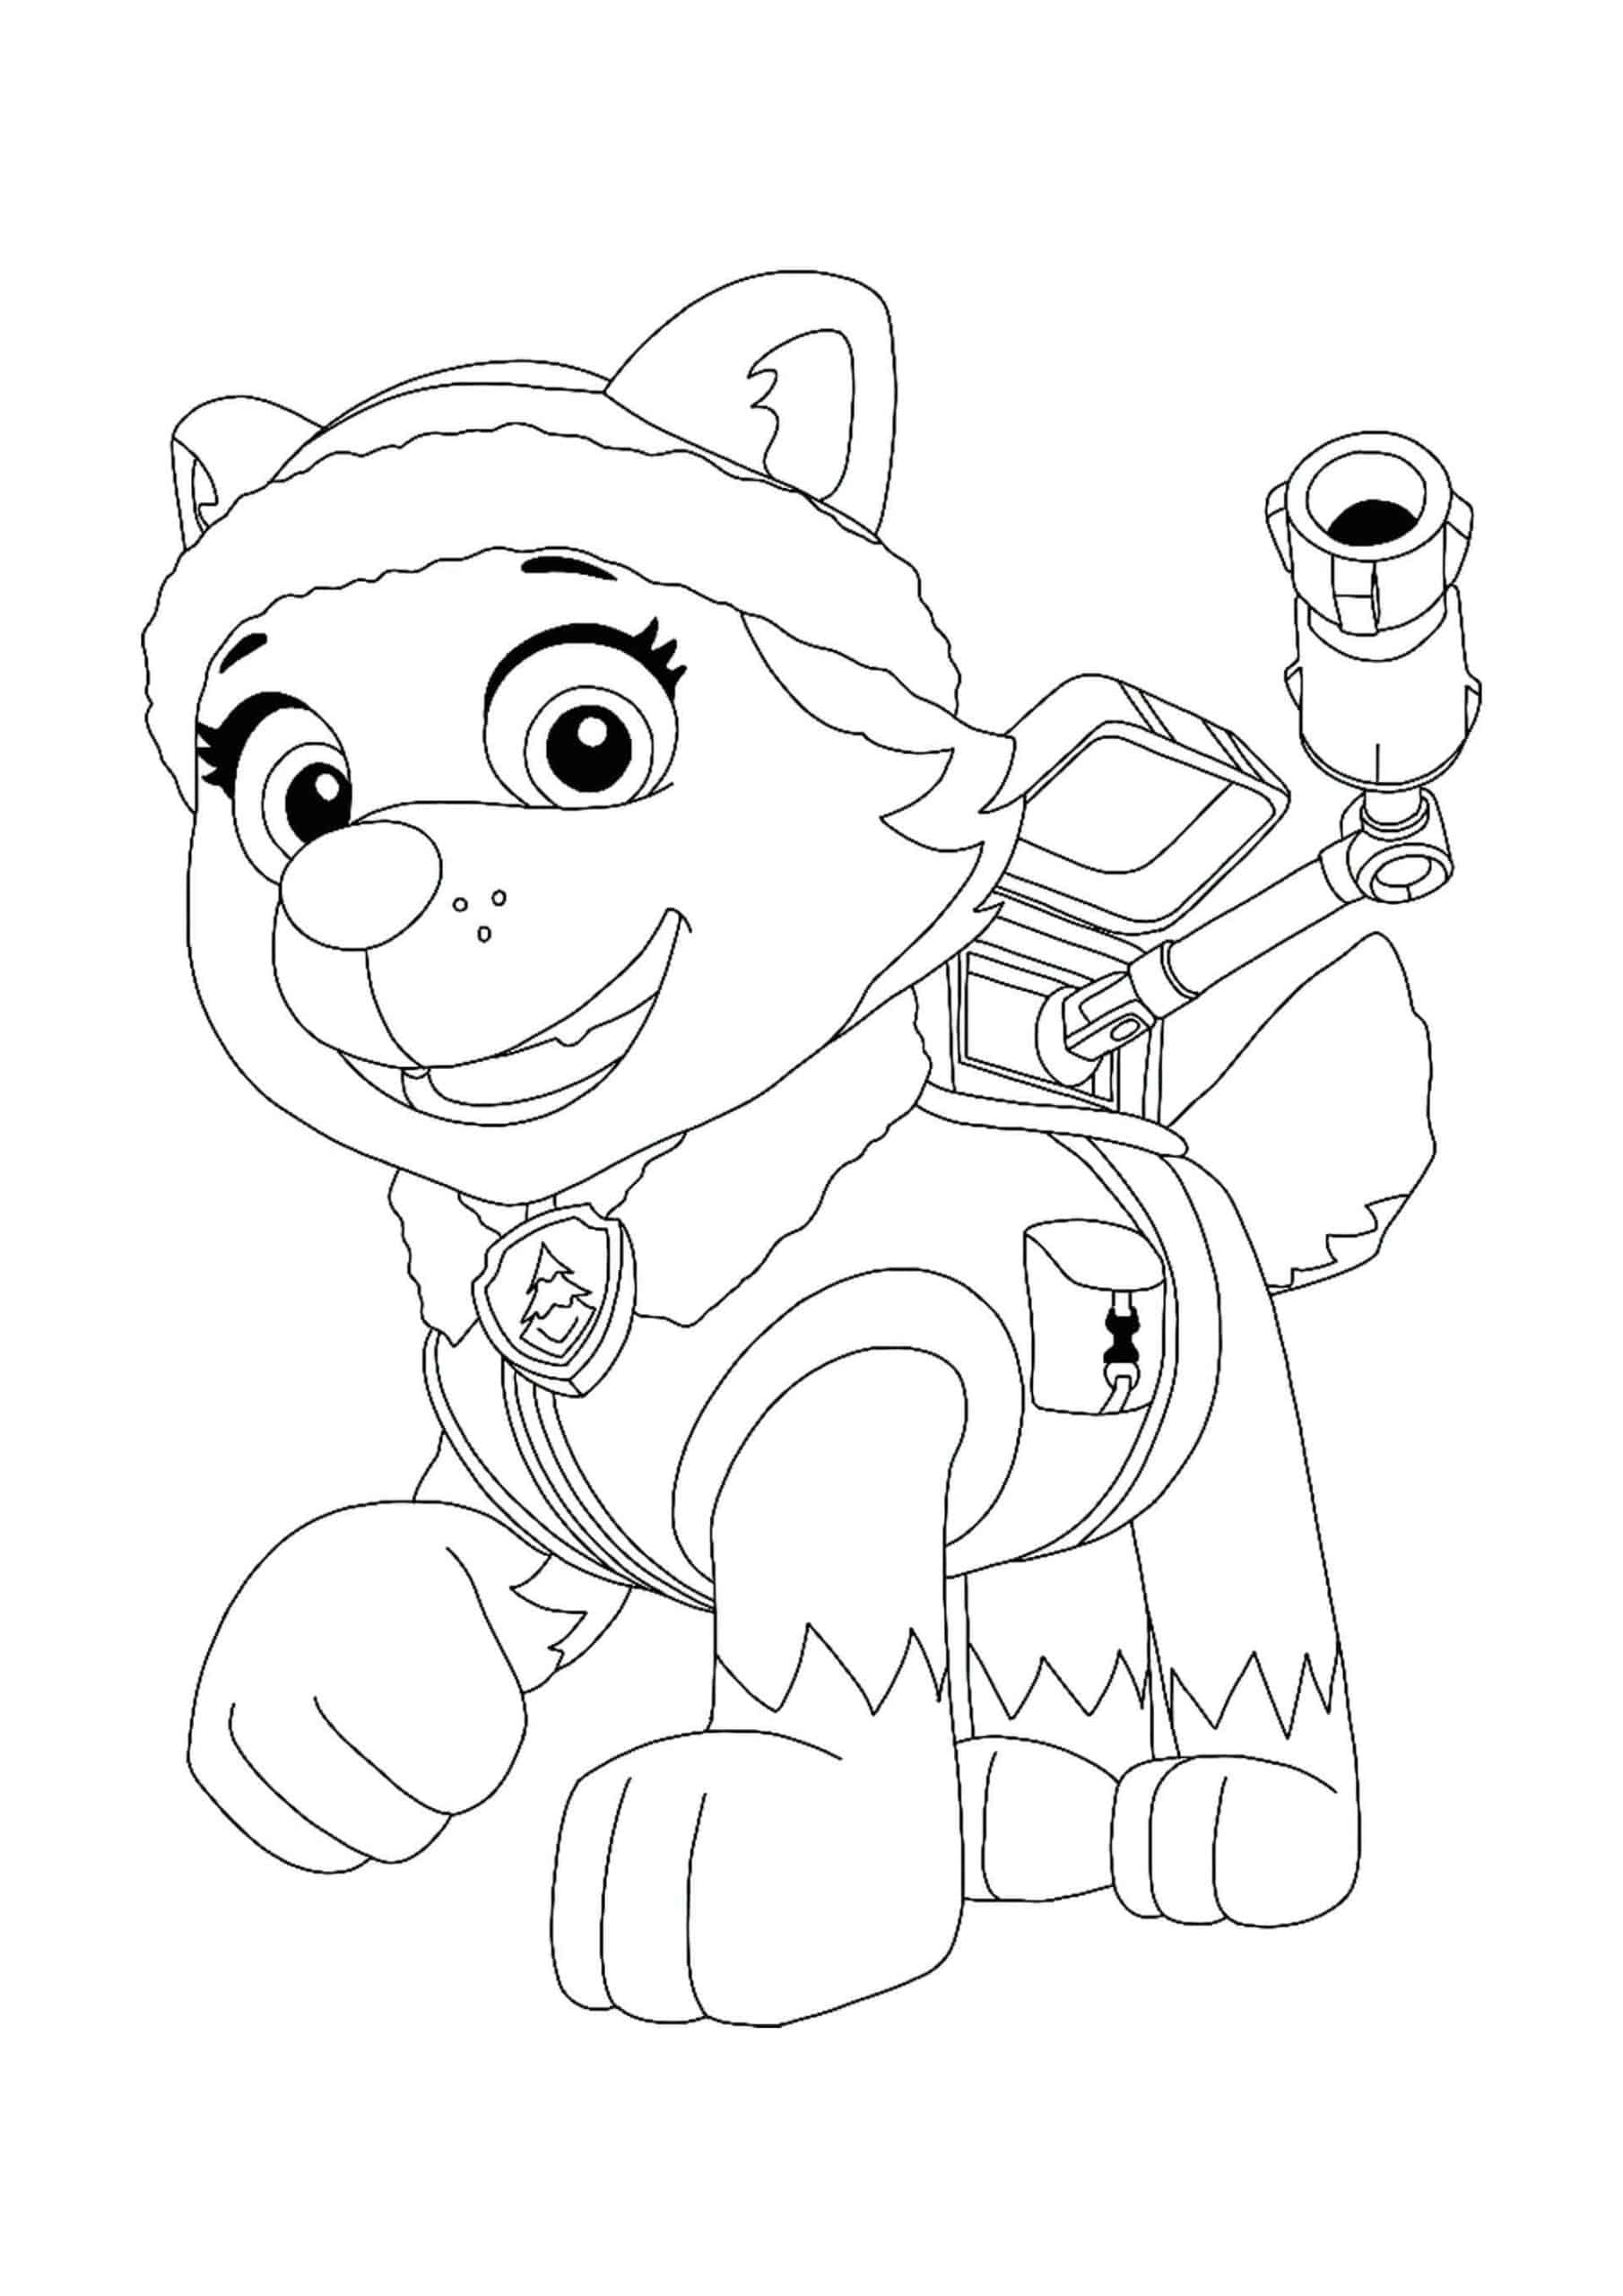 Paw Patrol Everest Coloring Pages - Coloring Home in Paw Patrol Ausmalbilder